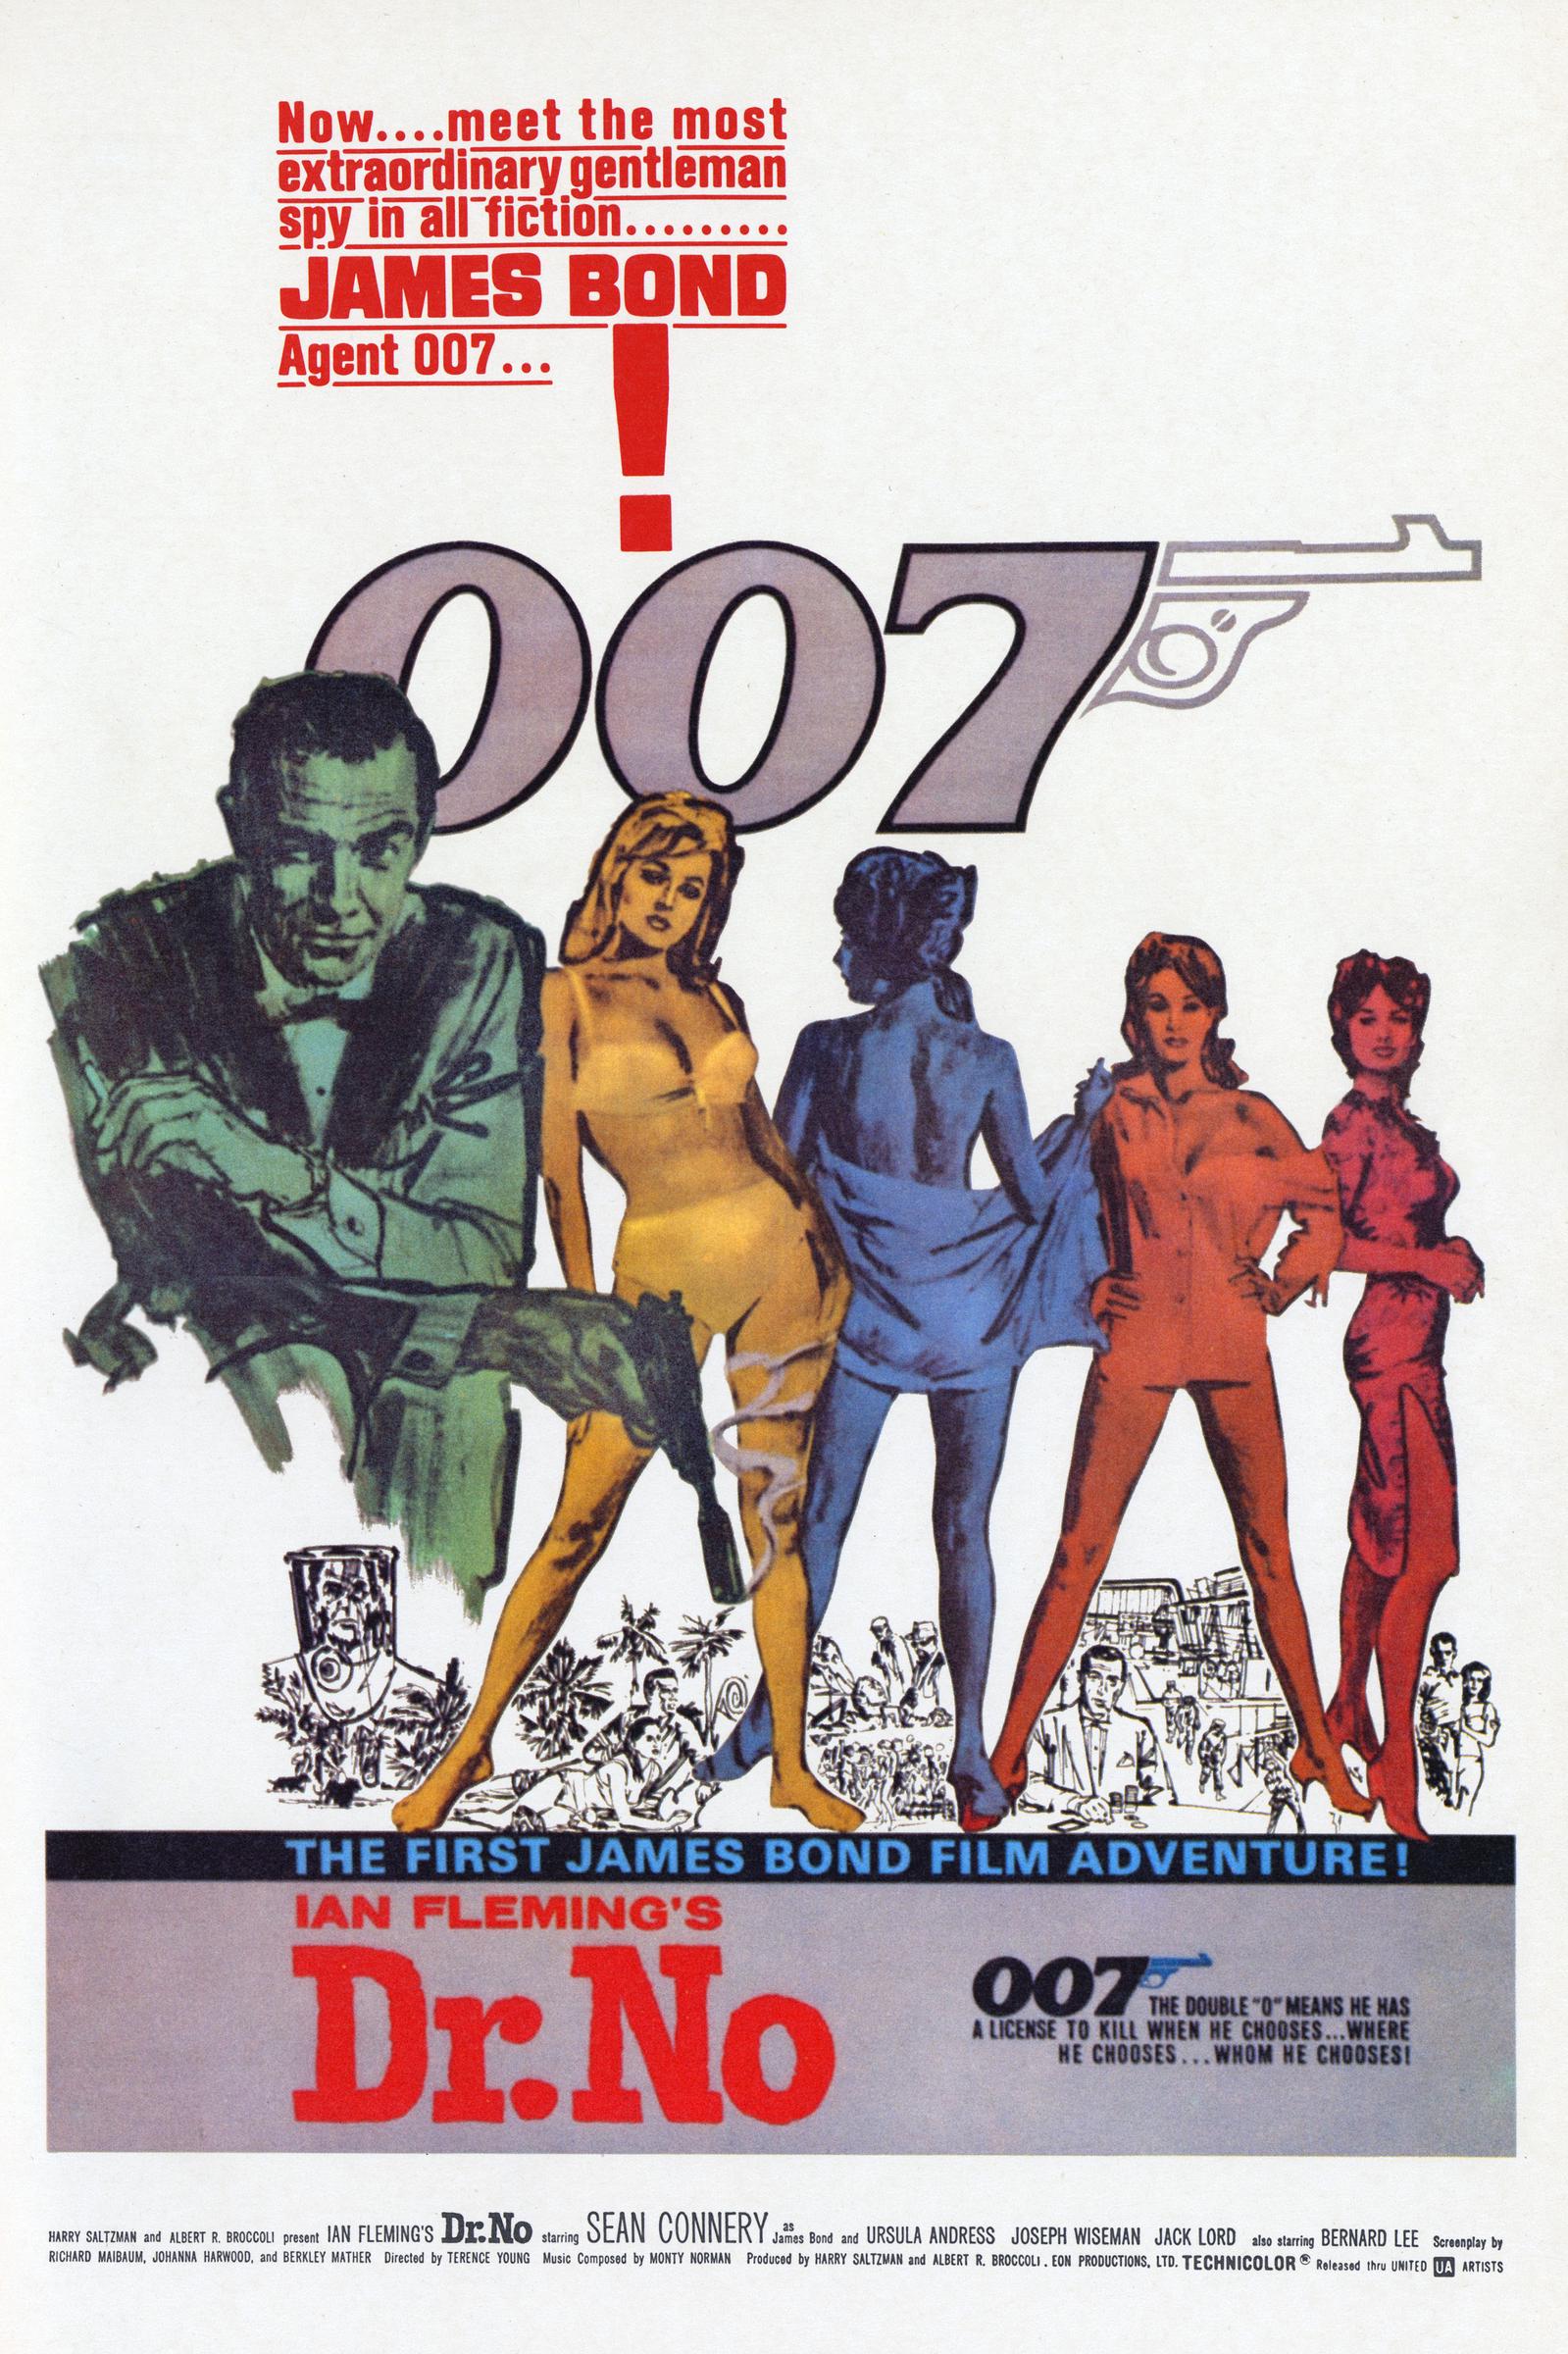 Movie poster for the film "Dr No", from the adventures series of secret agent 007 in 1967. | Source: Getty Images